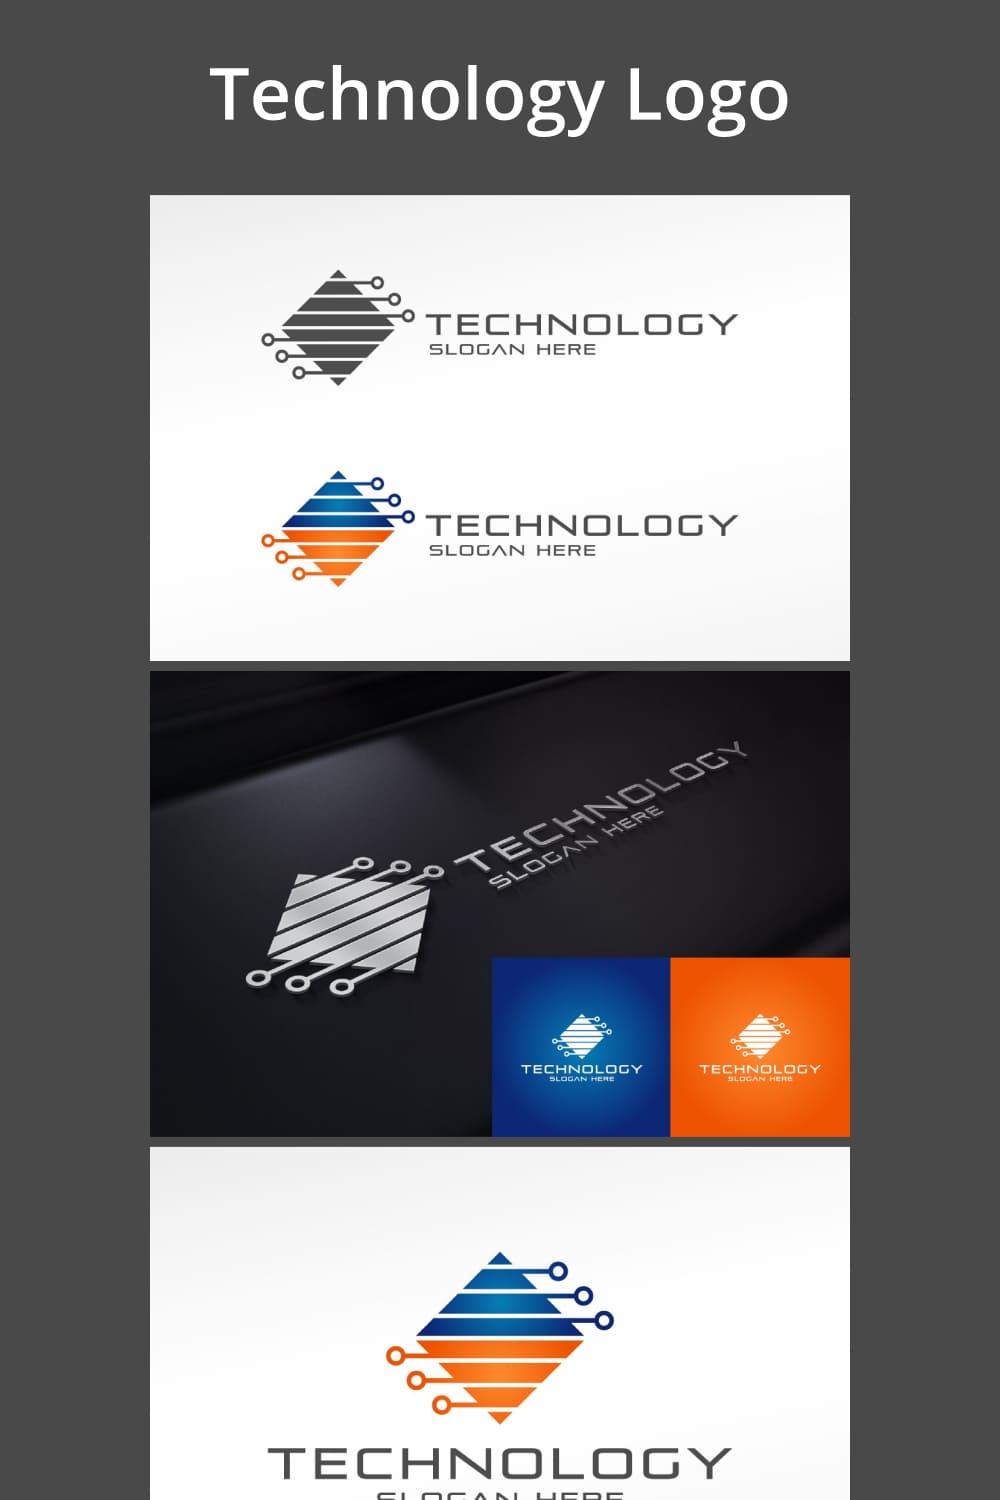 Technology Logo - preview image.